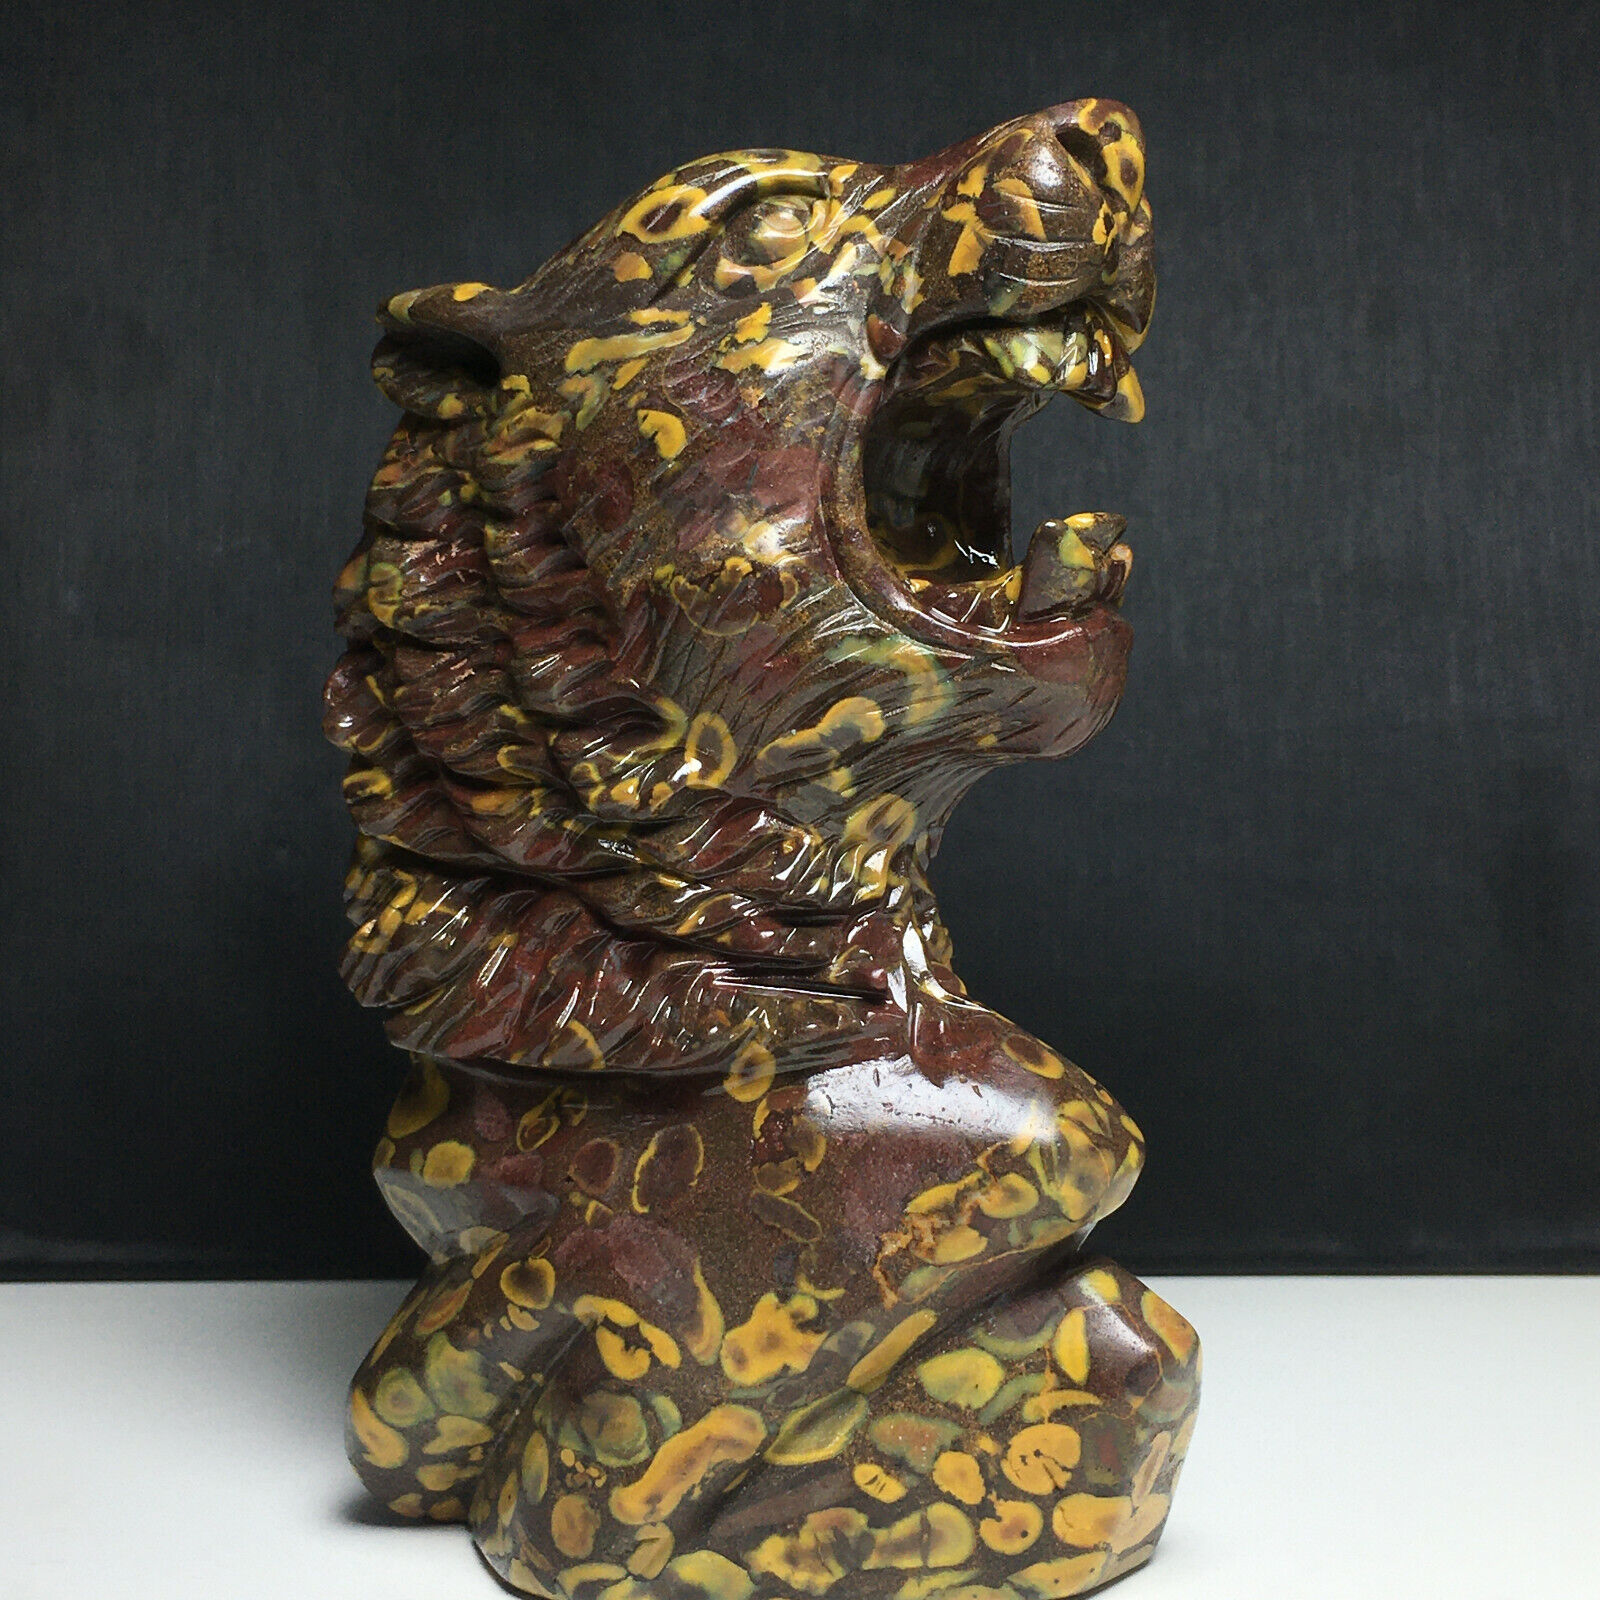 622g Natural Crystal . INDIA FOSSIL STONE. Hand-carved. The Exquisite Tiger Head